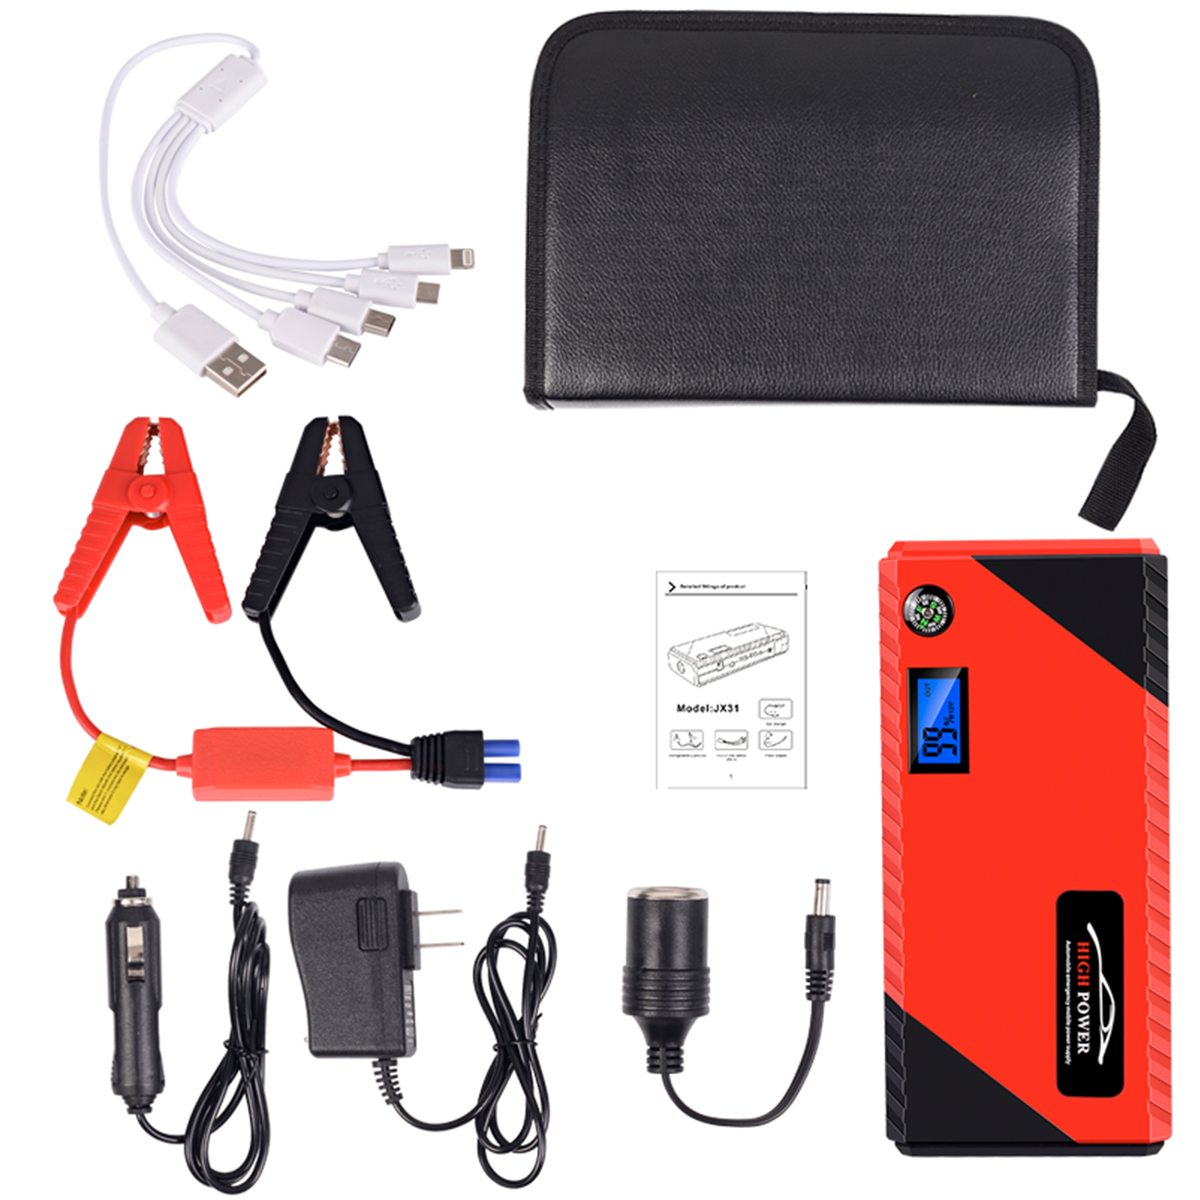 

JX31 Display 98600mAh 12V Car Jump Starter Portable USB Emergency Power Bank Battery Booster Clamp 1000A DC Port Red